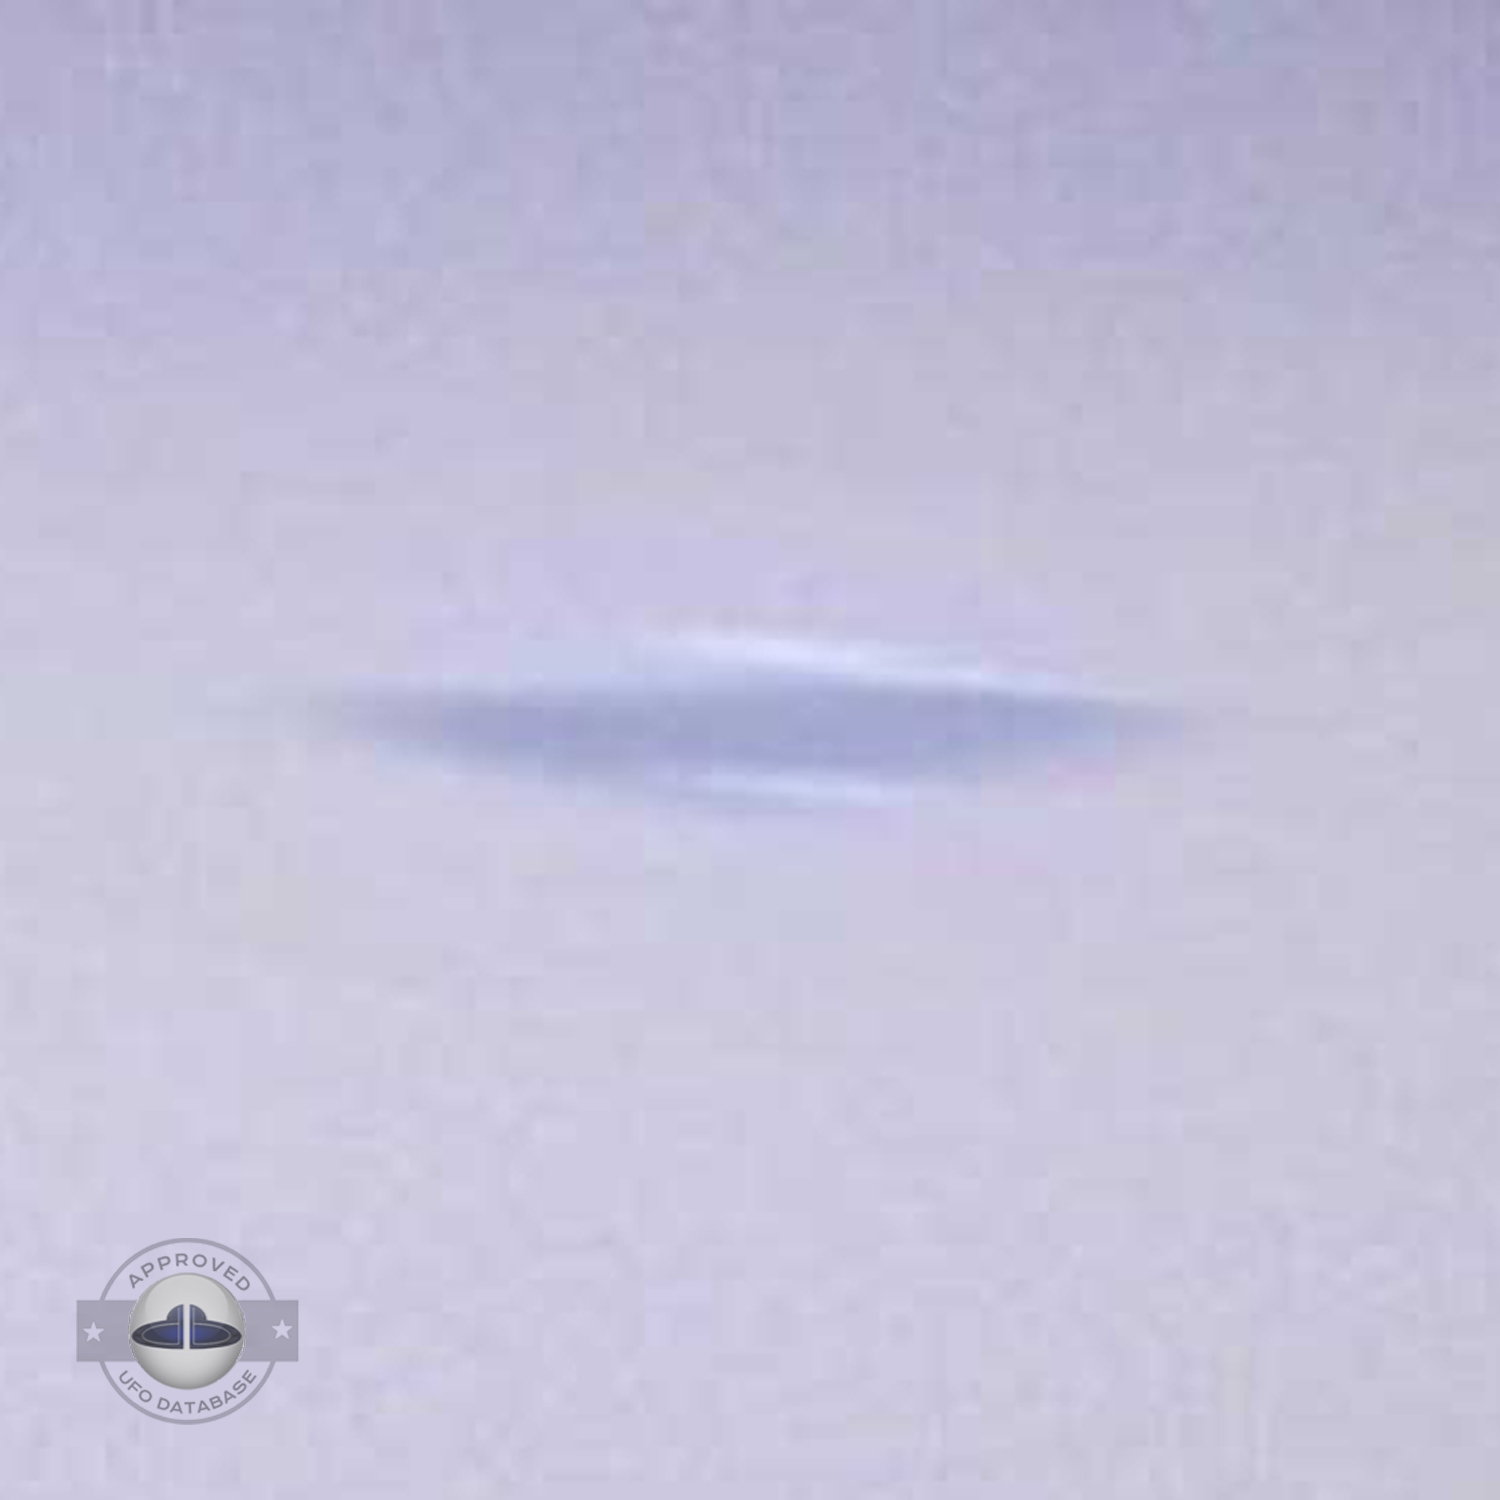 The ufo is moving over the Atlantic ocean in the Canary island UFO Picture #72-4